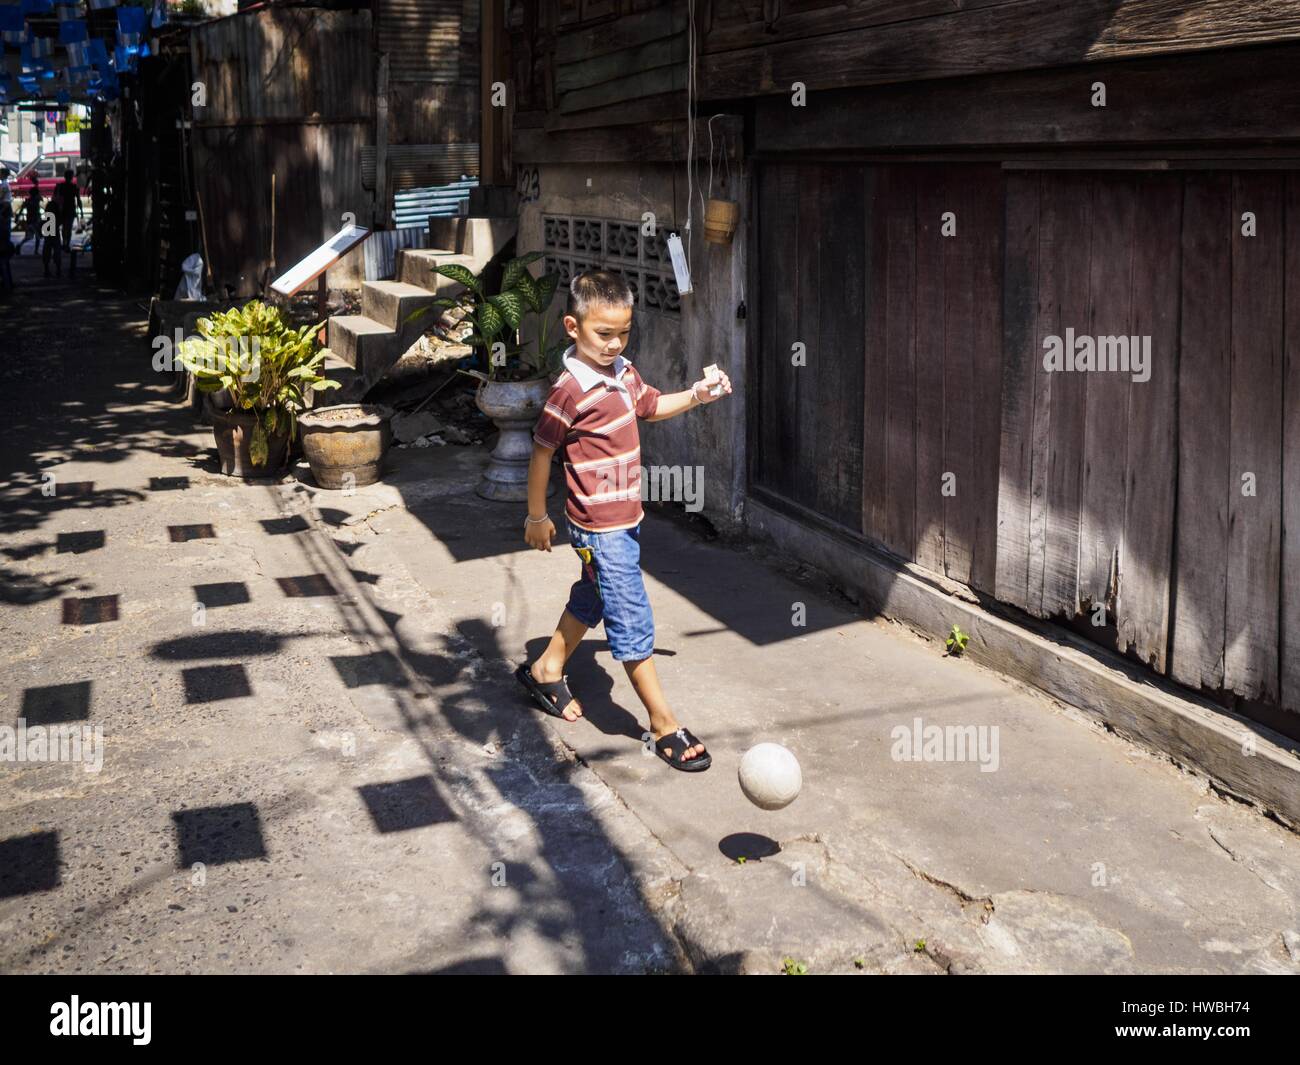 Bangkok, Bangkok, Thailand. 20th Mar, 2017. A boy plays with a plastic ball on a sidewalk in Pom Mahakan. The final evictions of the remaining families in Pom Mahakan, a slum community in a 19th century fort in Bangkok, have started. City officials are moving the residents out of the fort. NGOs and historic preservation organizations protested the city's action but city officials did not relent and started evicting the remaining families in early March. Credit: Jack Kurtz/ZUMA Wire/Alamy Live News Stock Photo